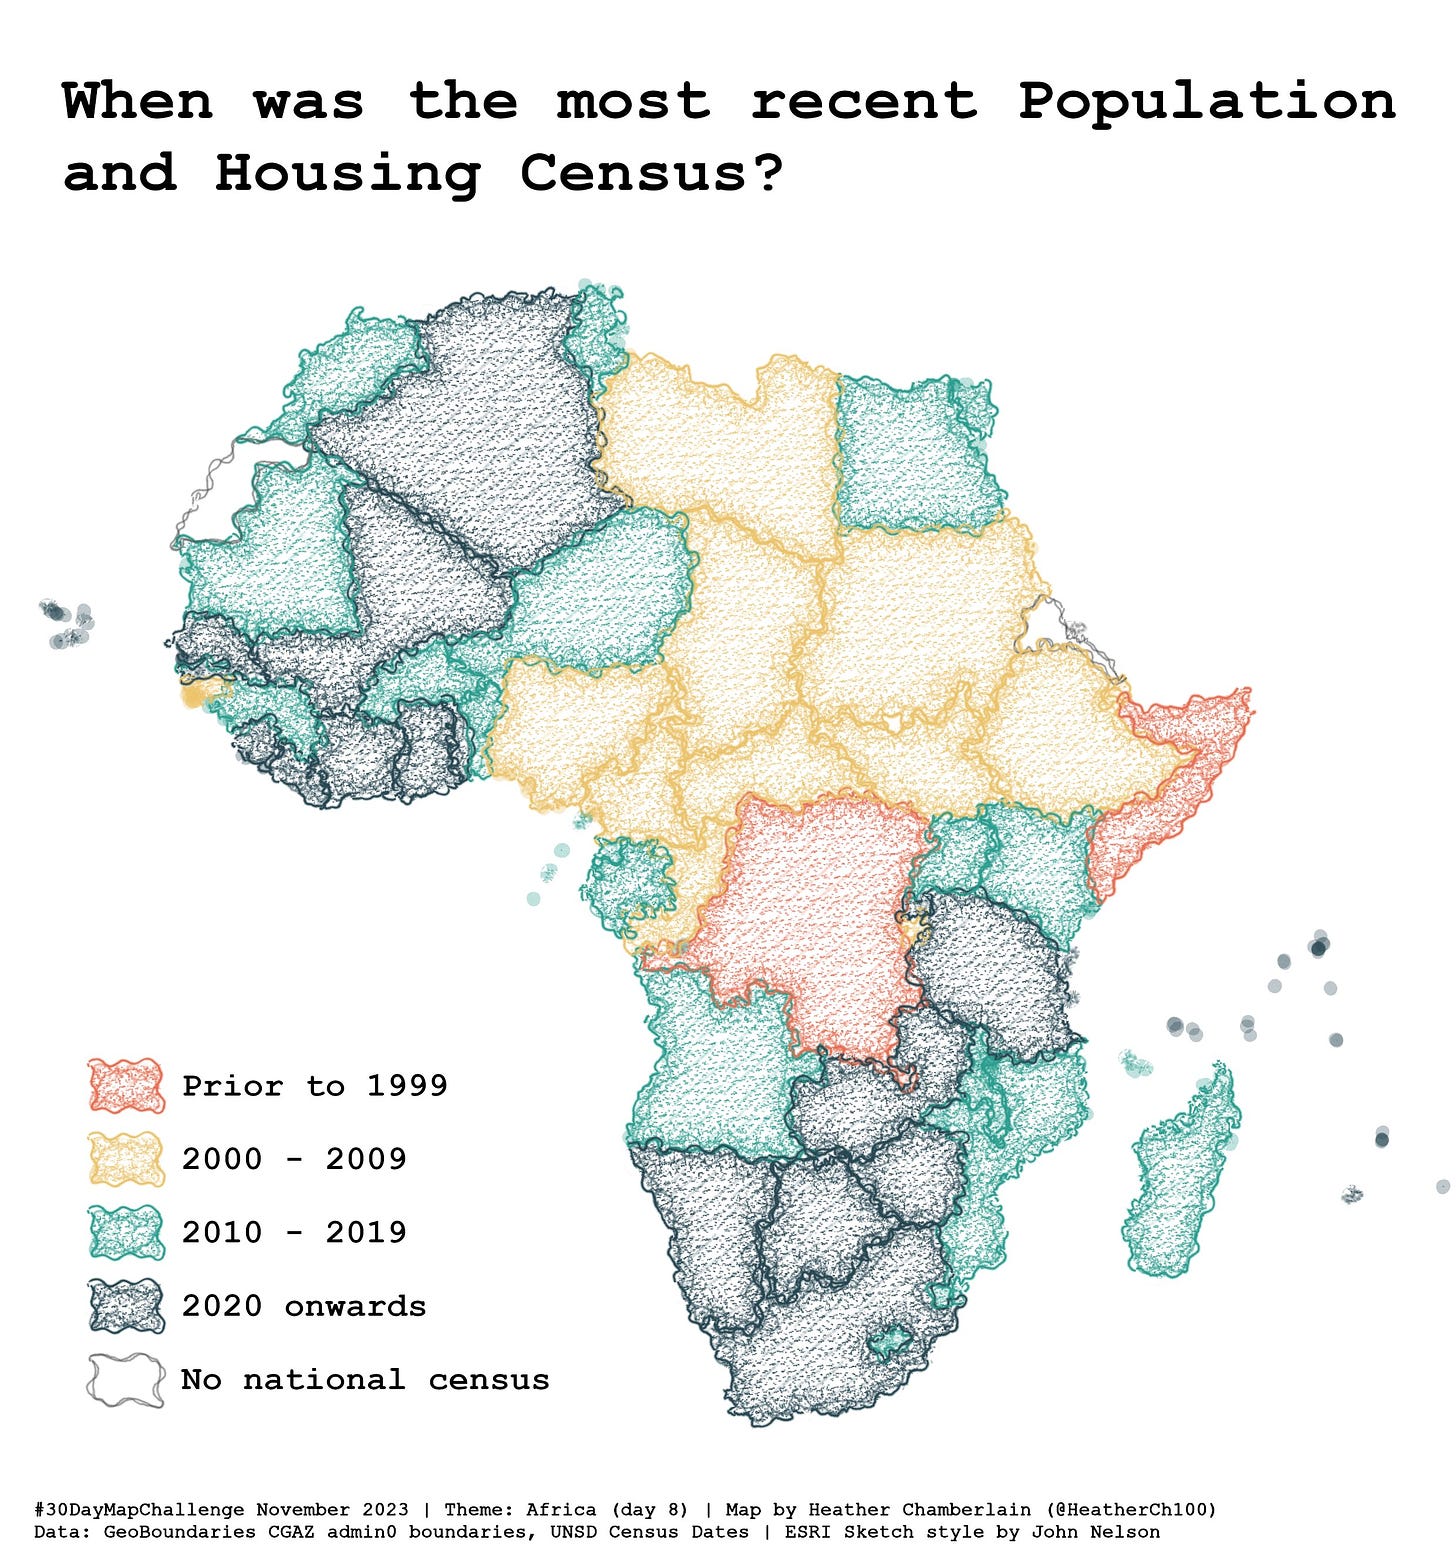 A map showing countries of Africa, with each country shaded according to the decade in which the last census was conducted from red (prior to 1999, yellow (2000-2009), turquoise (2010-2019) and blue (2020 onwards).